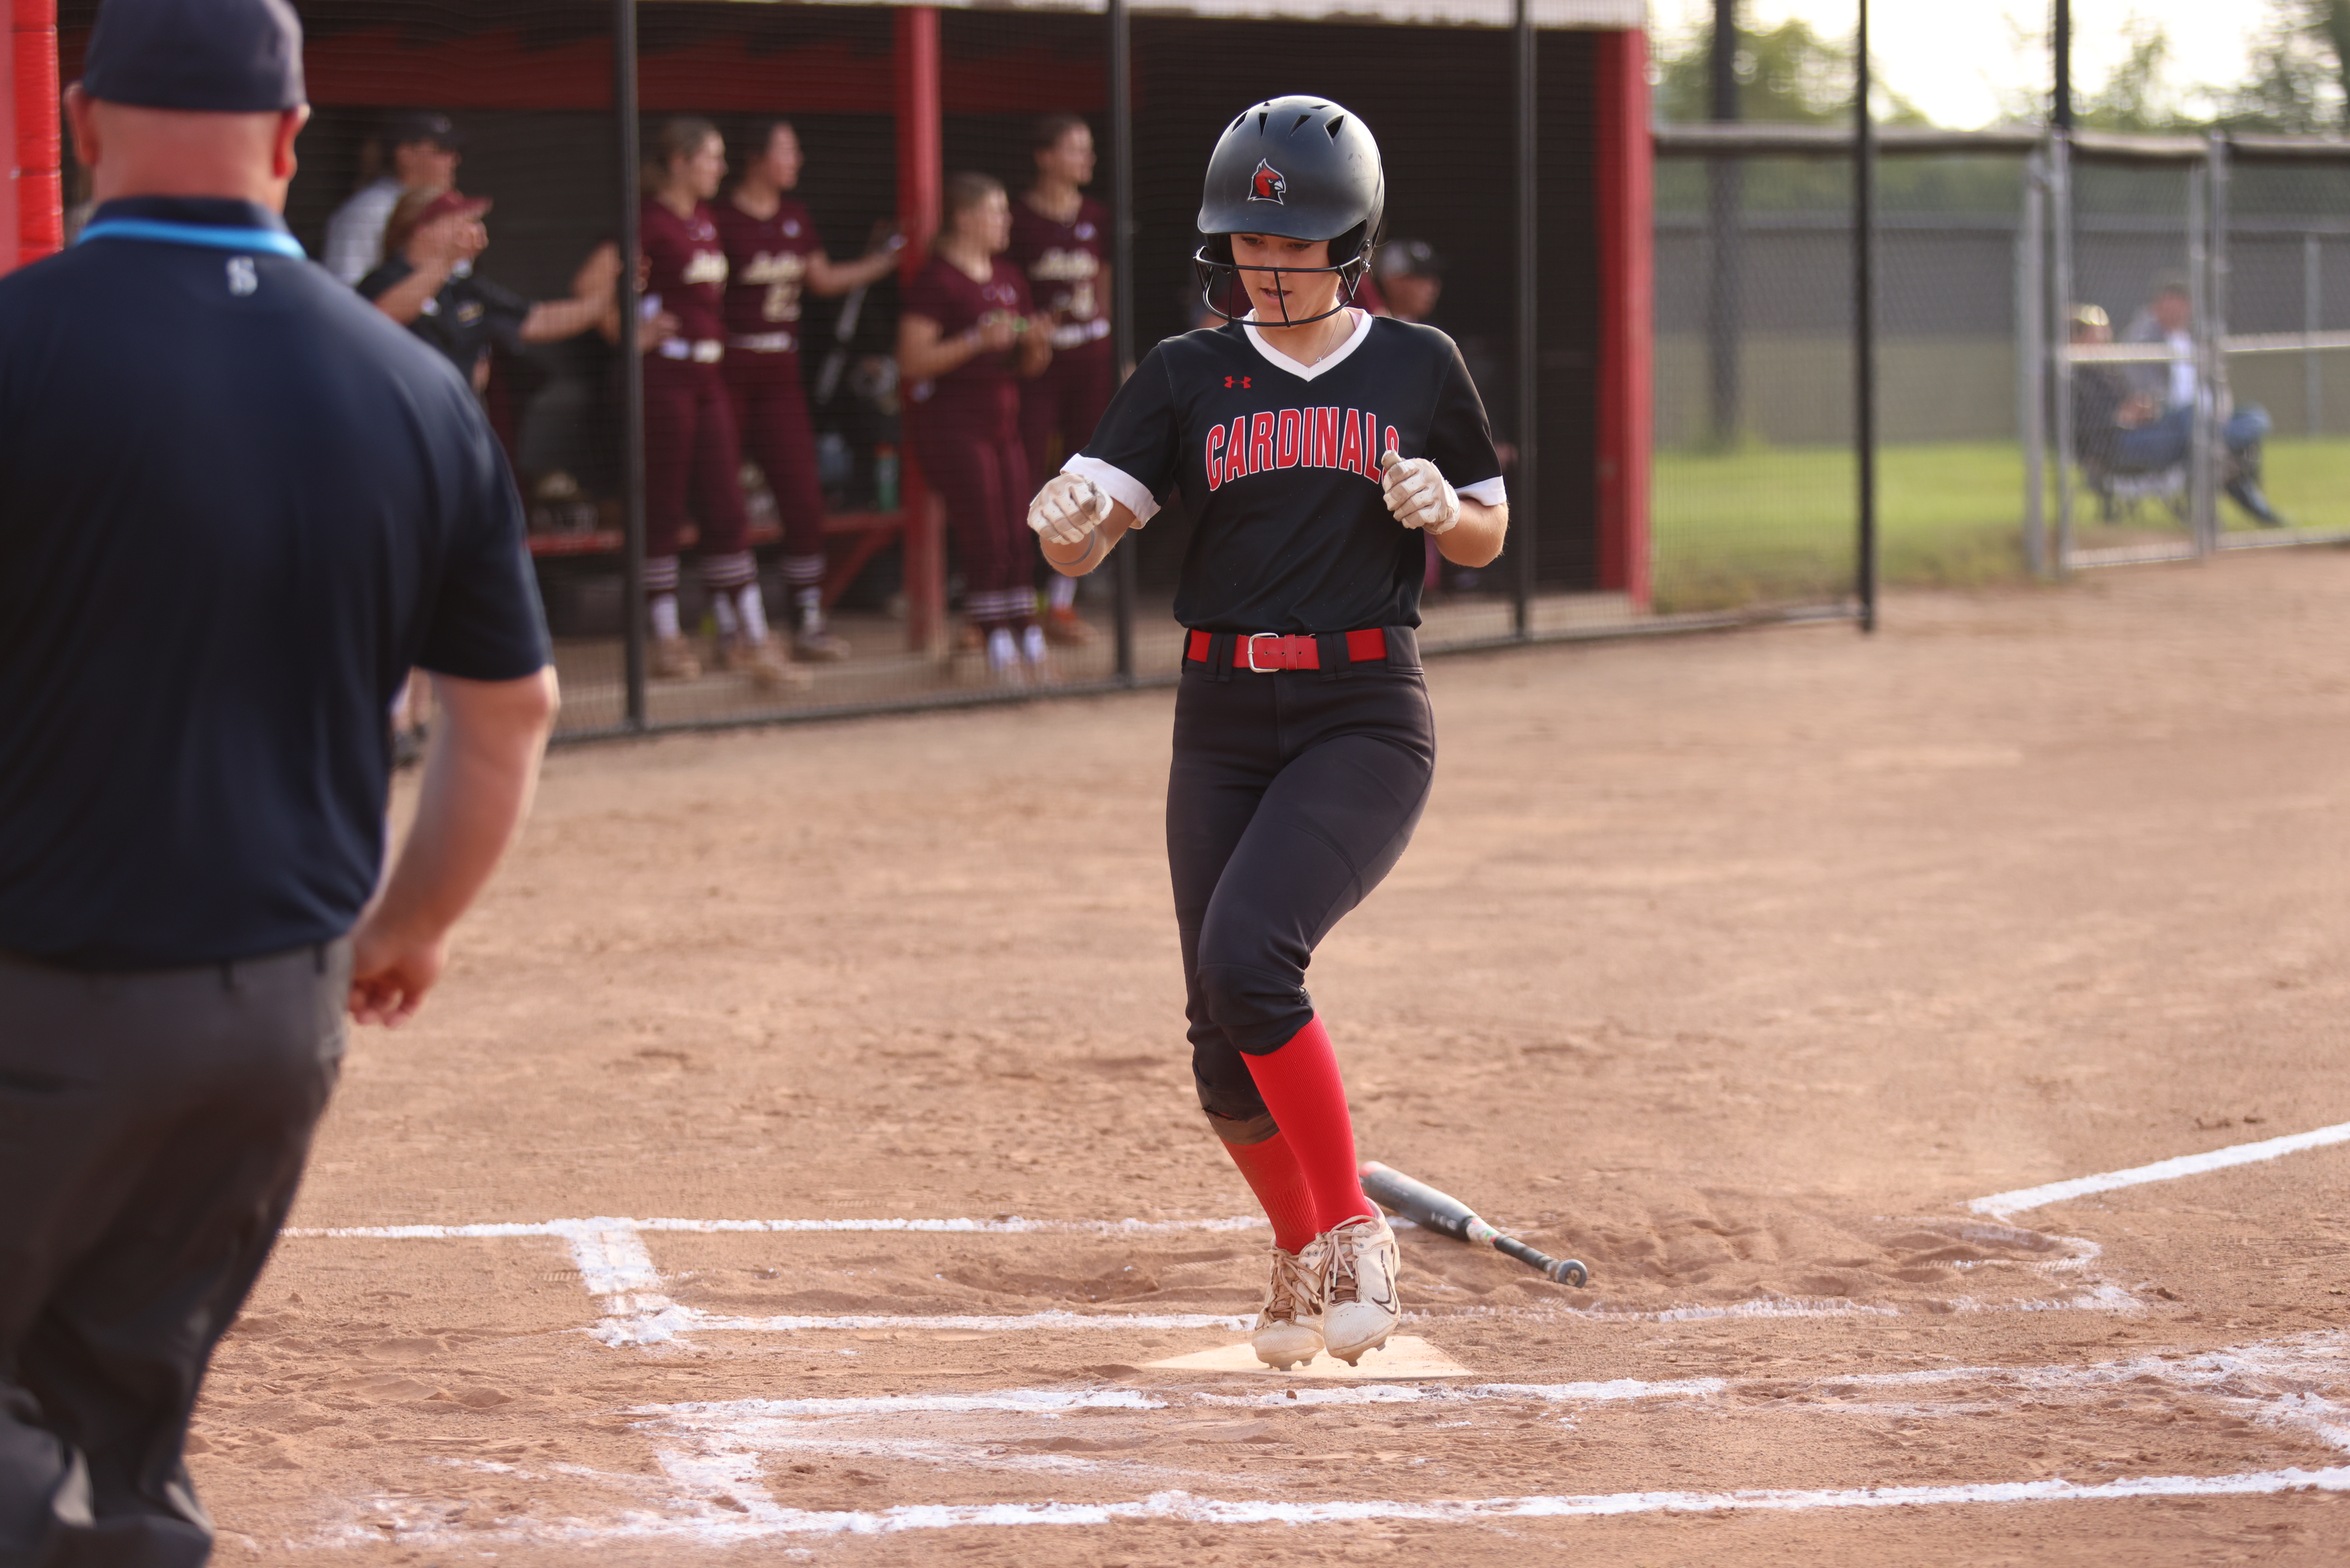 Softball picks up two wins on first day at USSSA Space Coast Games